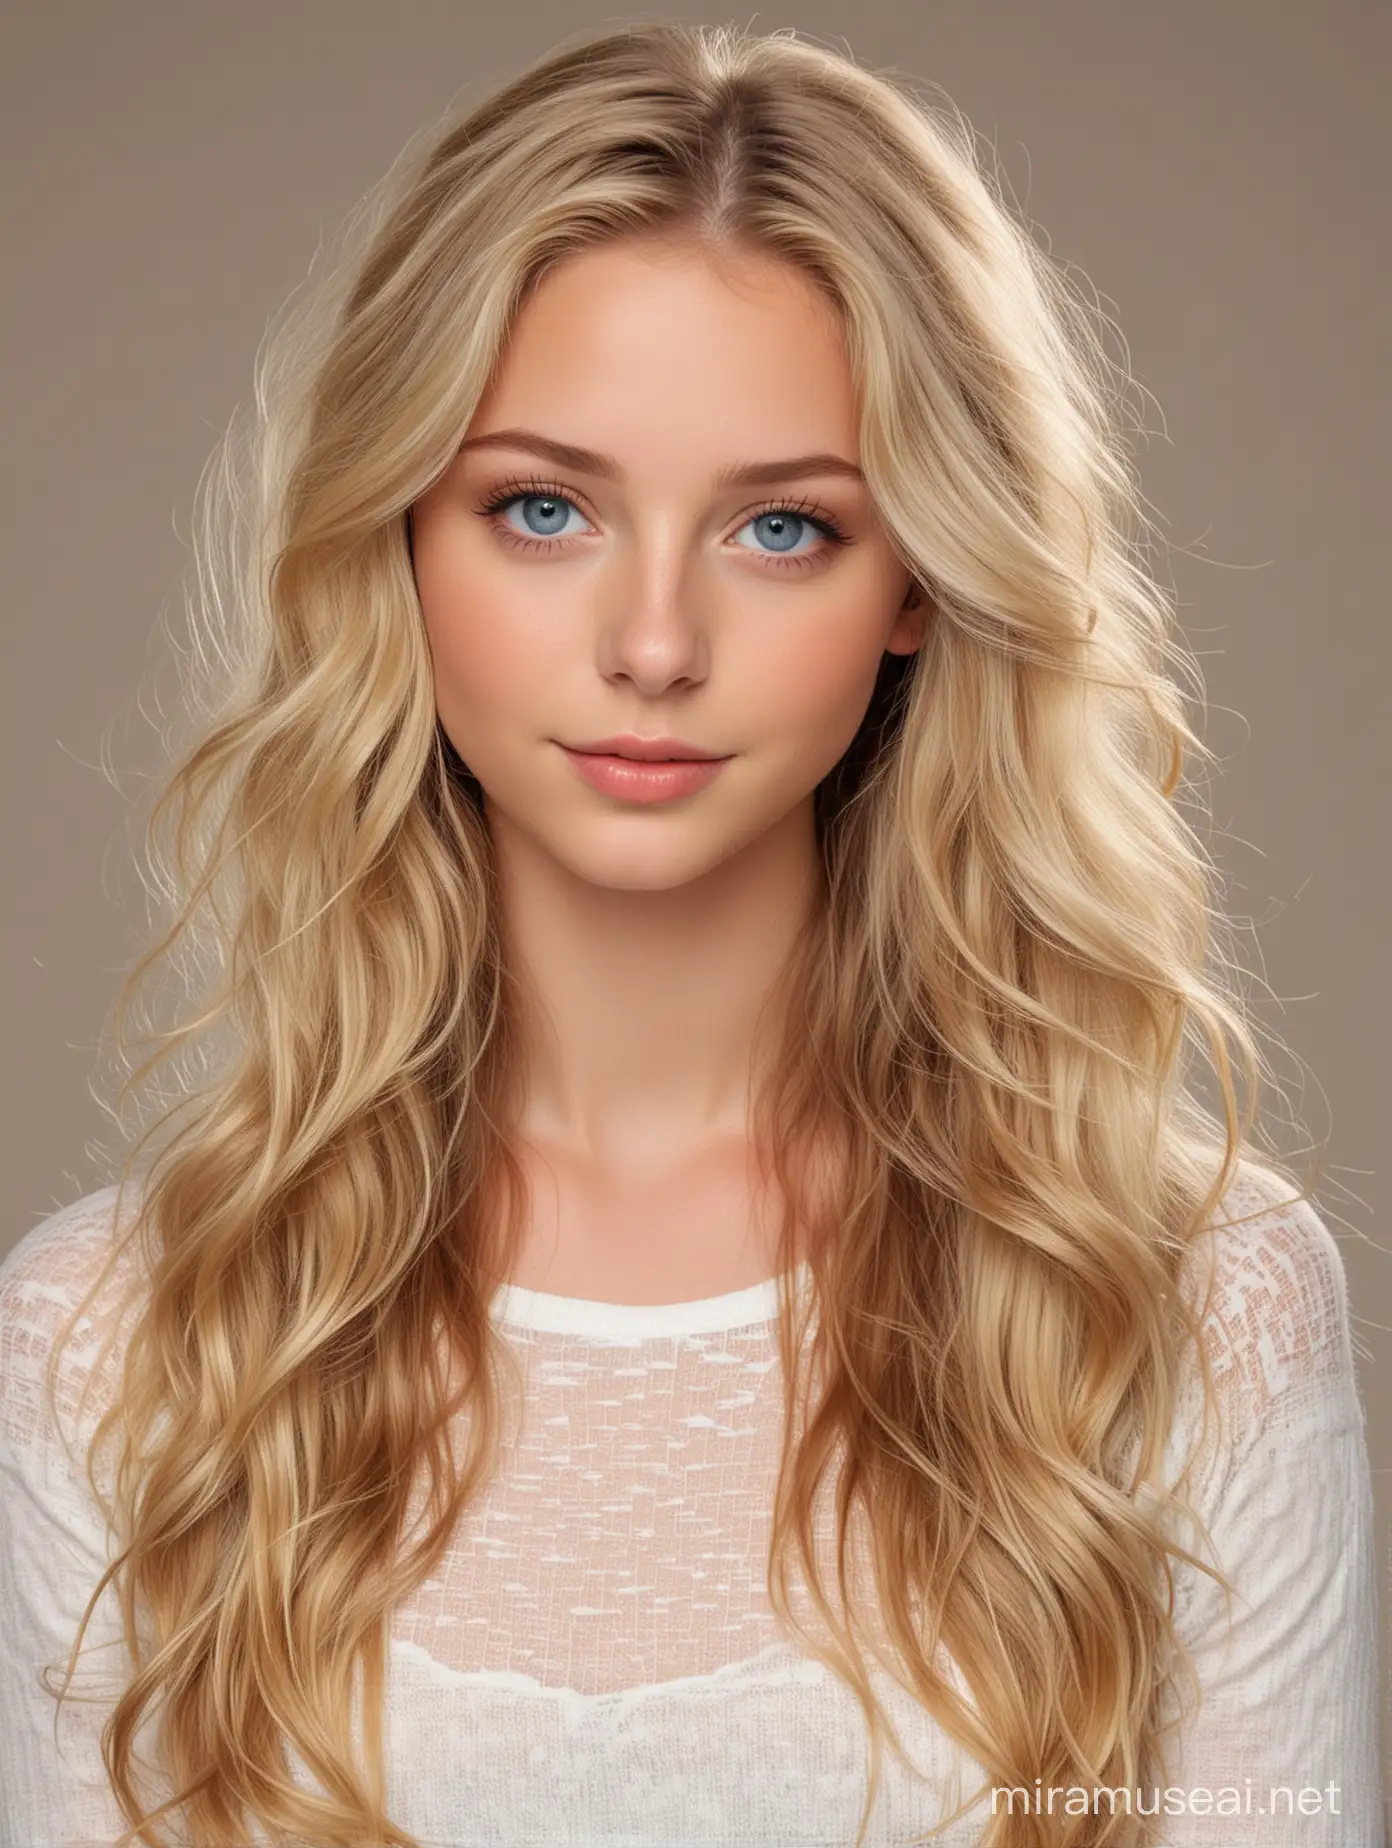 Adorable 18YearOld Blonde Model with Blue Eyes in Full Body View